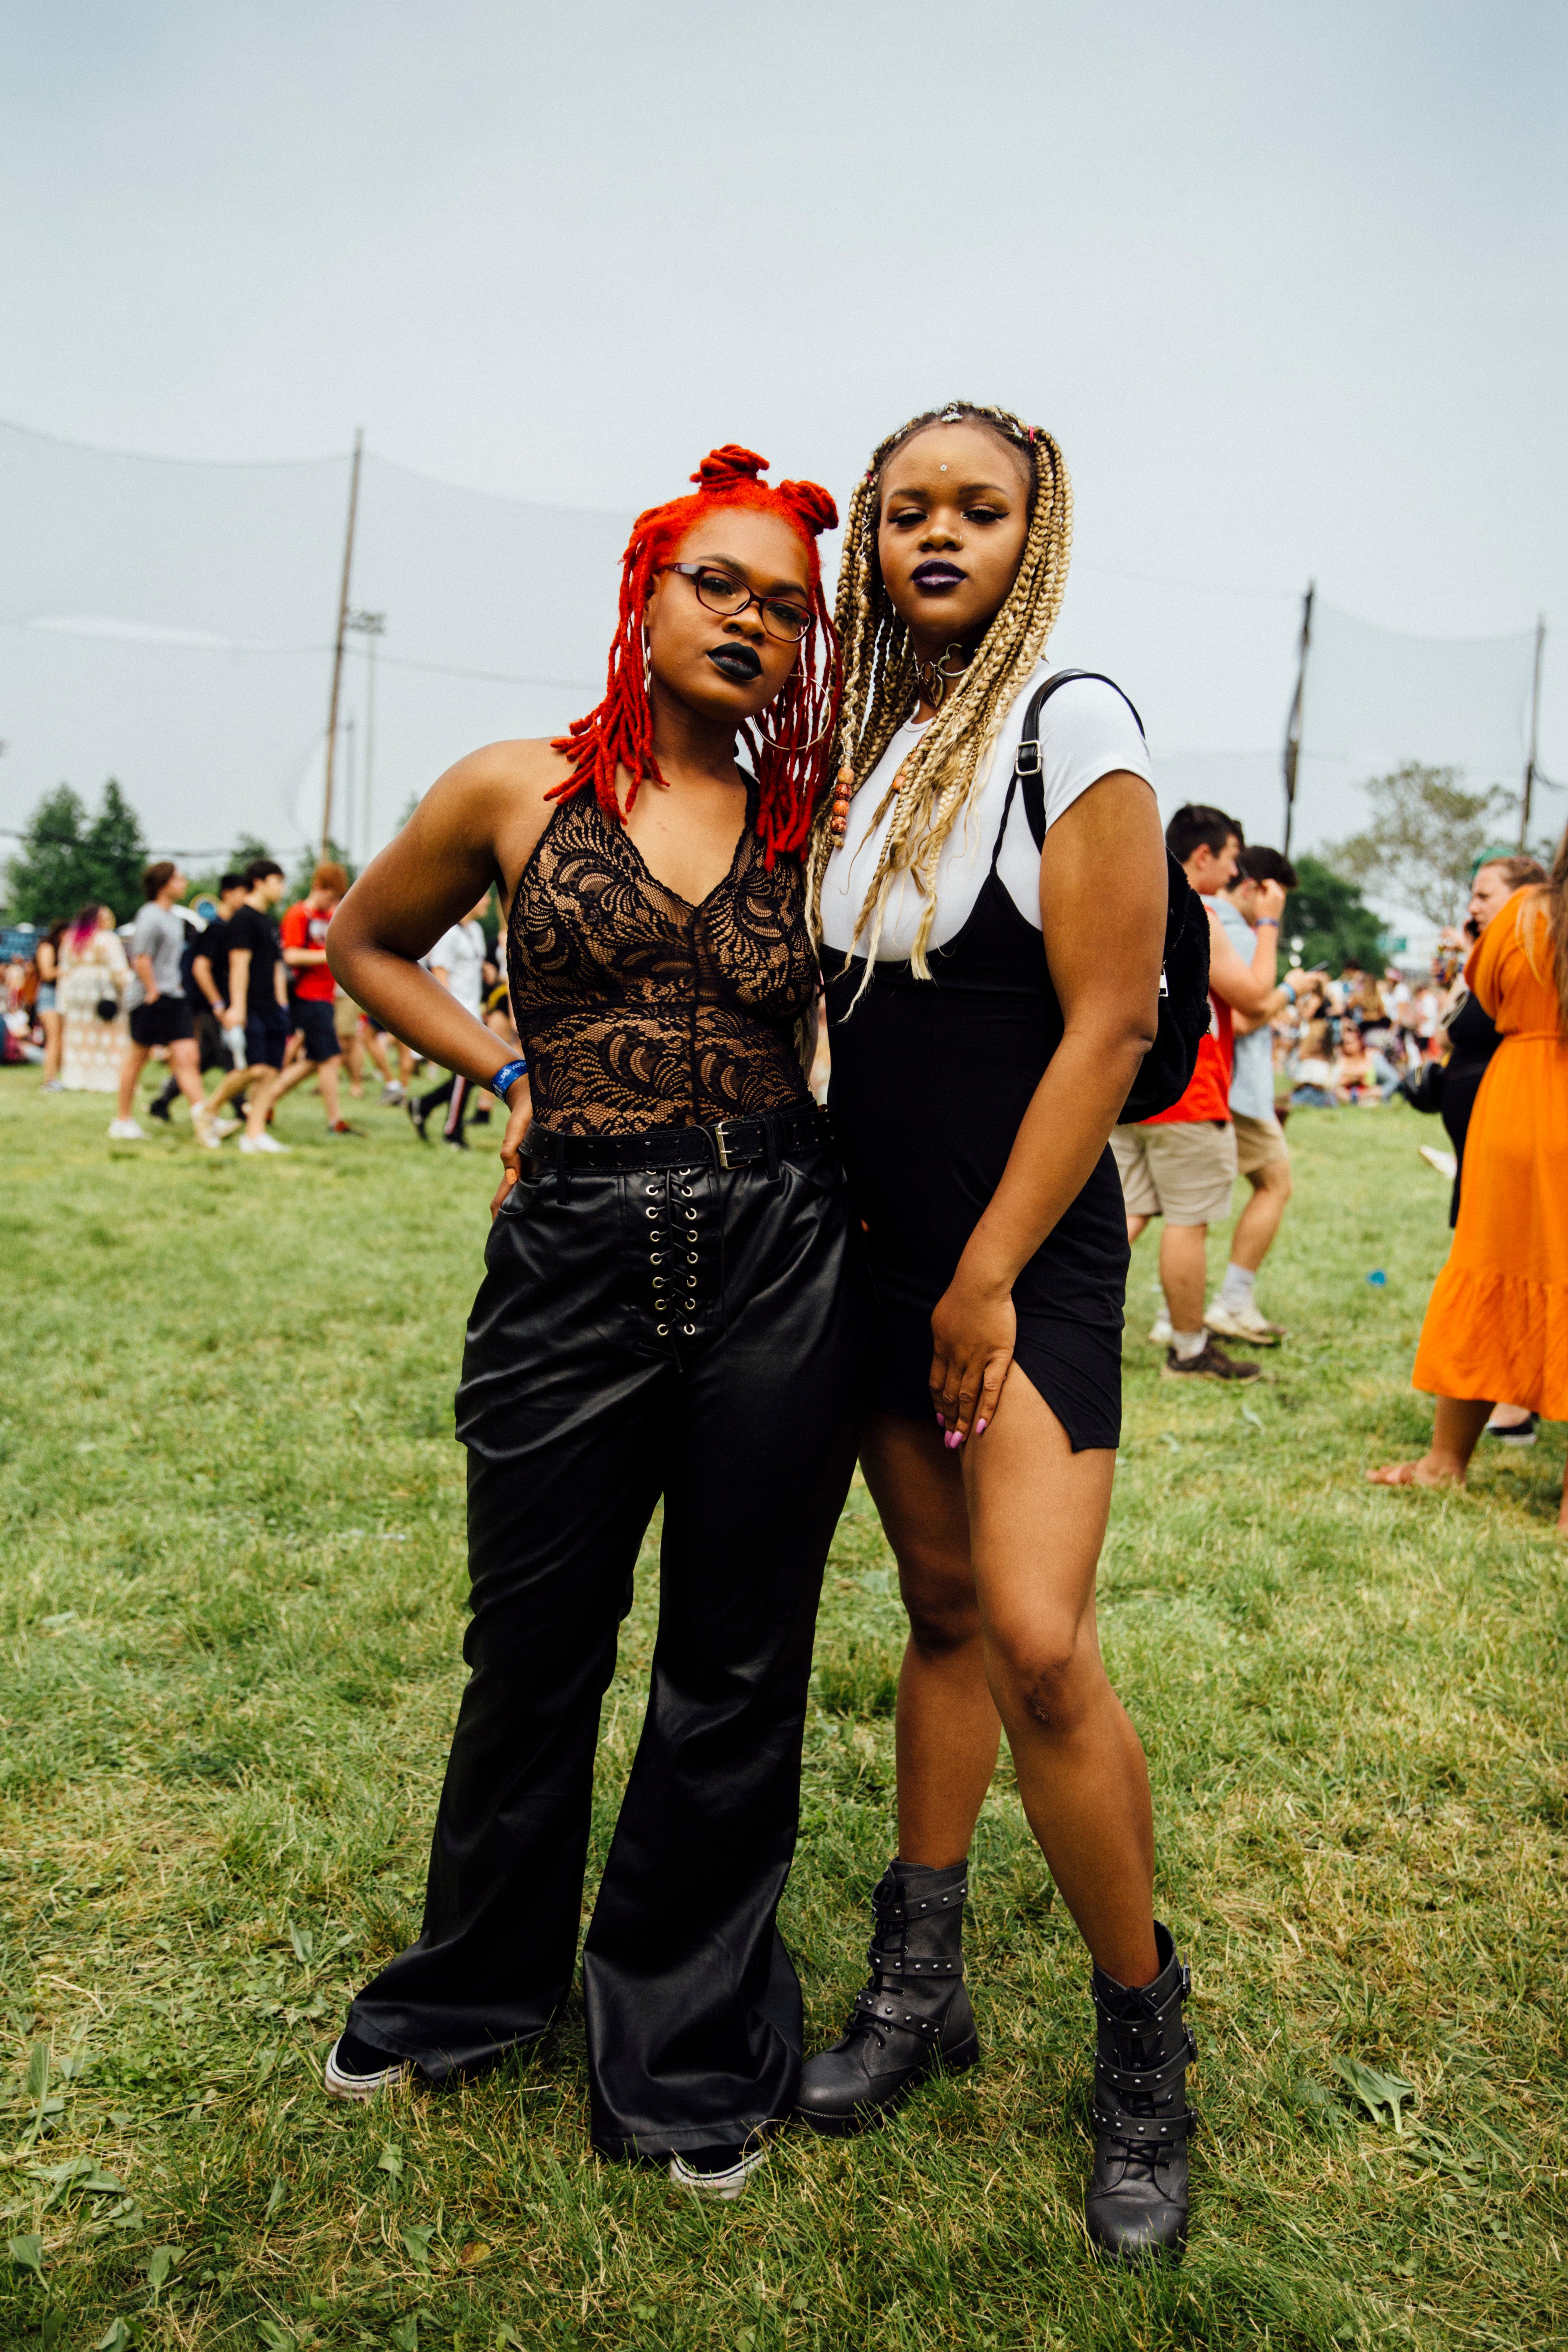 The Best Street Style Moments from the 2019 Governors Ball Music Festival